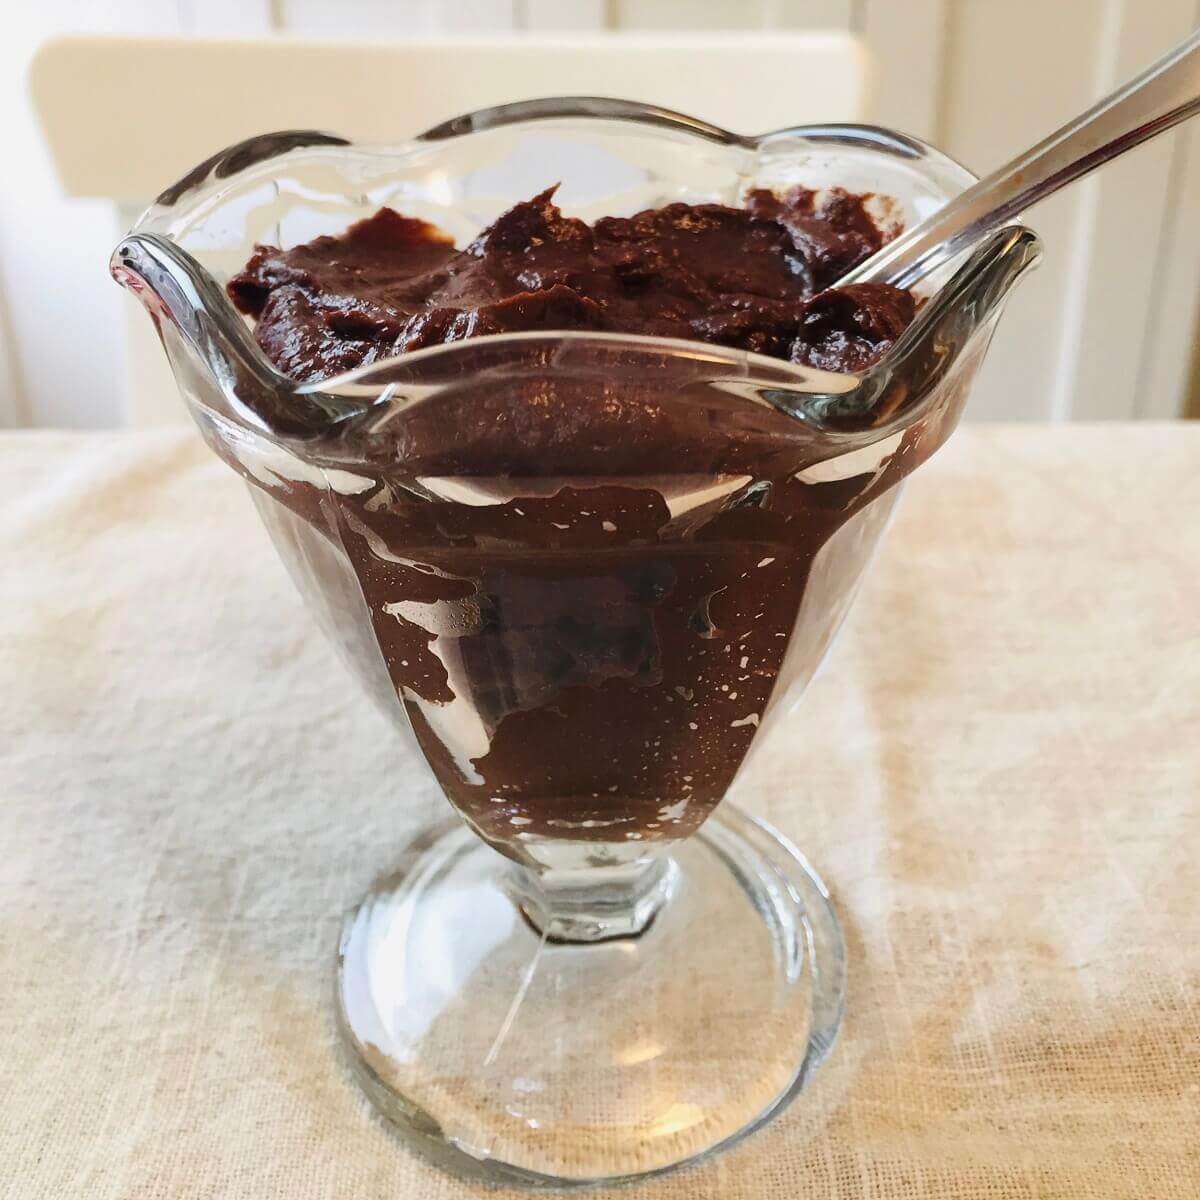 A glass dish filled with chocolate pudding.